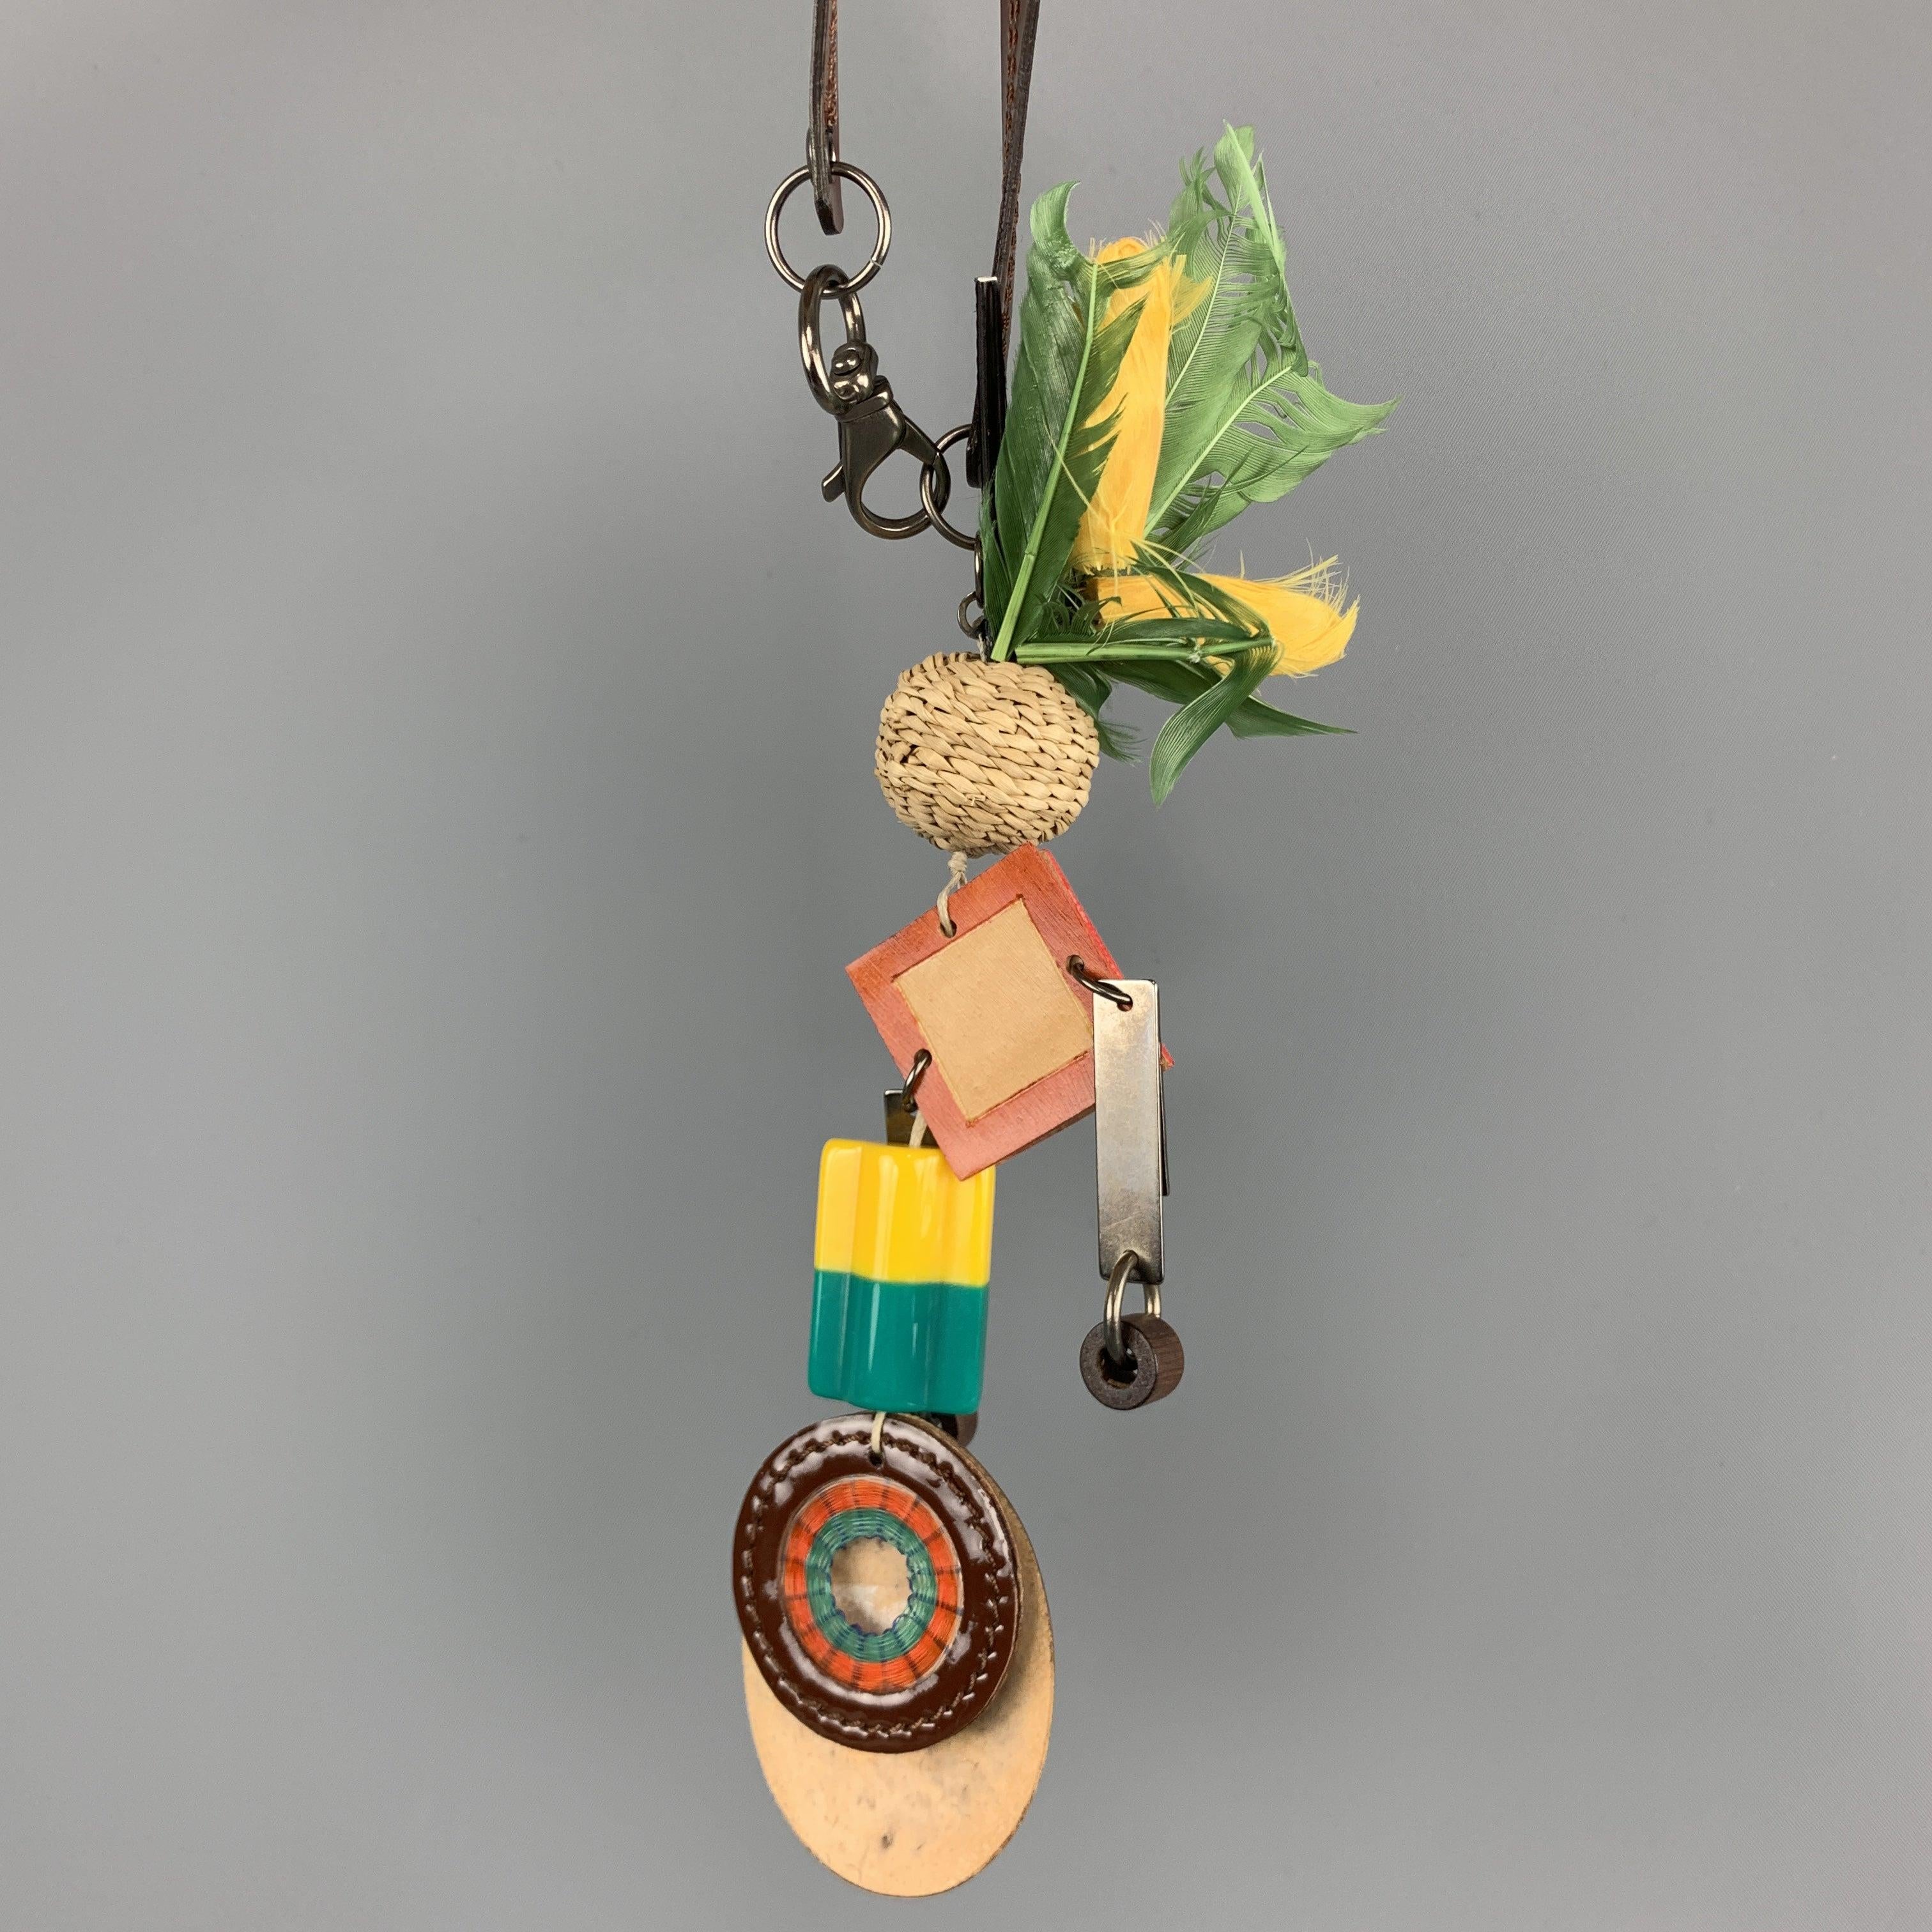 MARNI Key Ring Bag Charm comes in multi-color tones in mixed materials, with a brown patent leather strap, green feathers, straw, plastic and silver tone metal hardware, contrast stitching, and a lobster clasp closure. With dust bag and